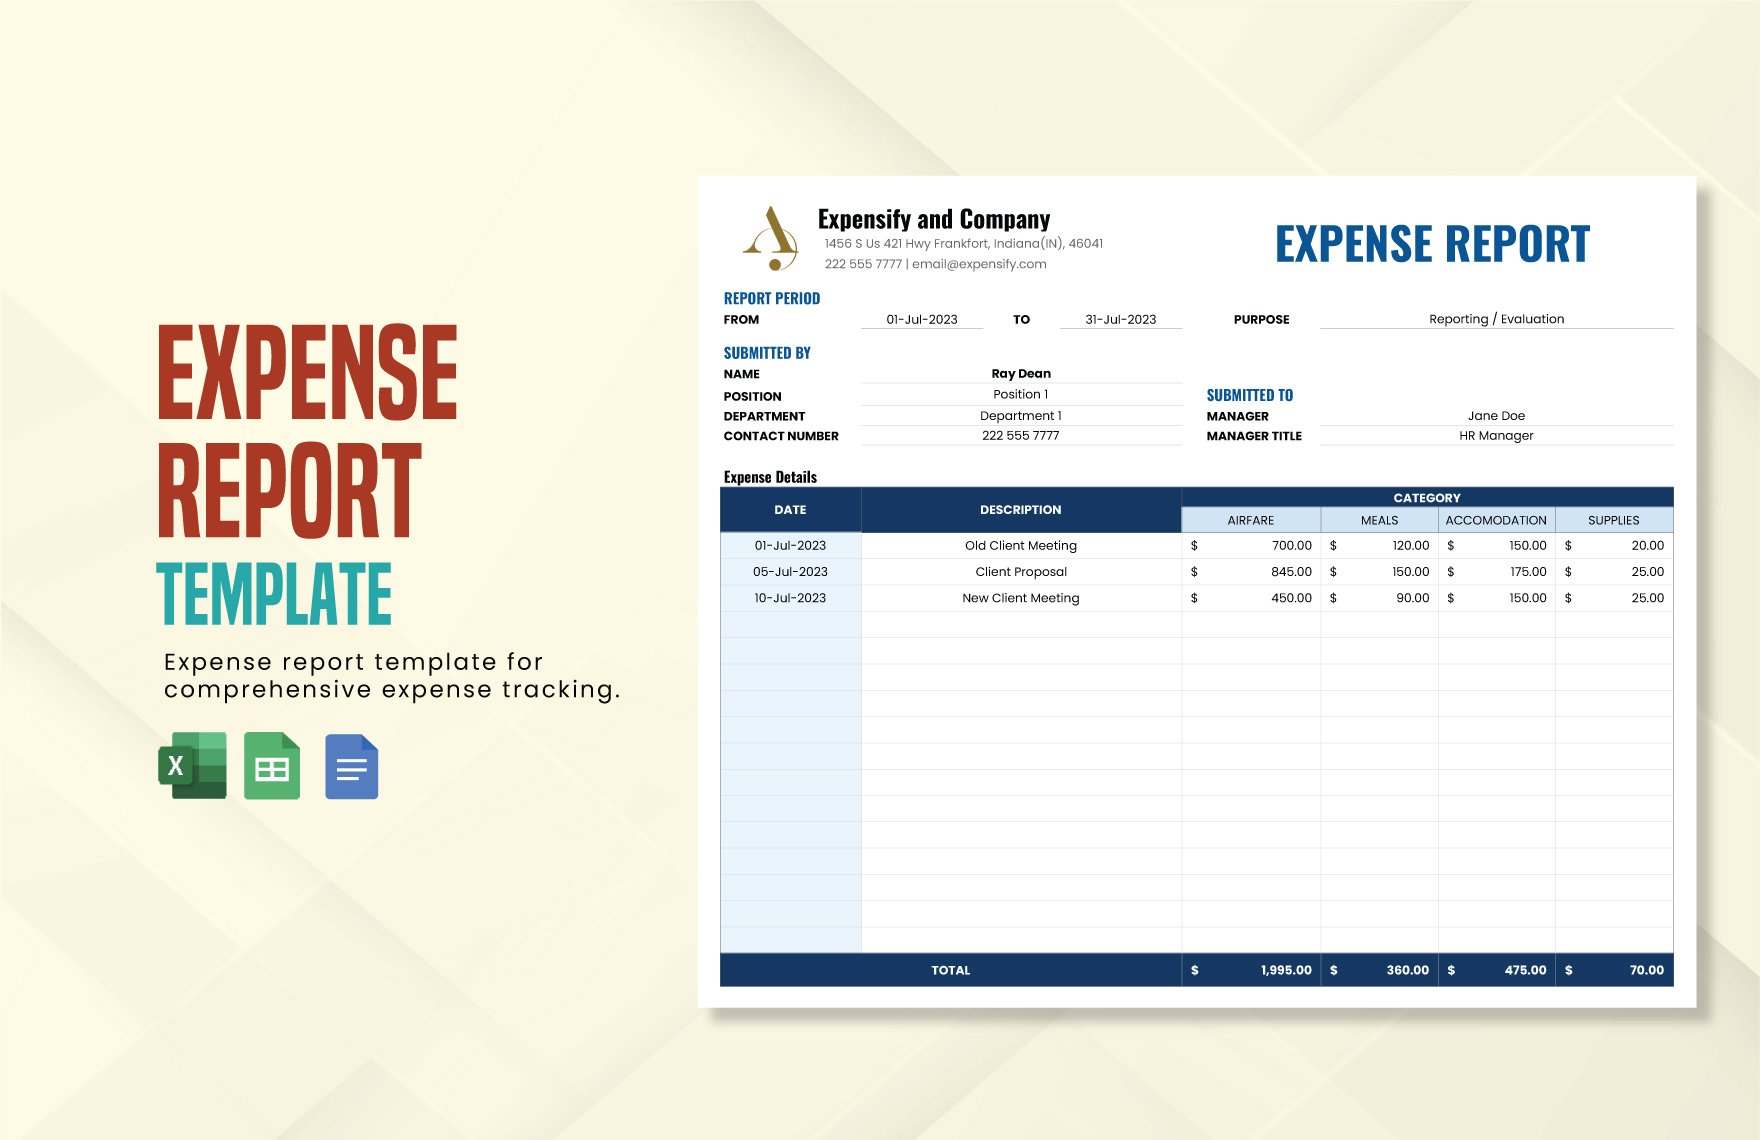 Annual Expense Report Template in MS Excel MS Word Google Sheets